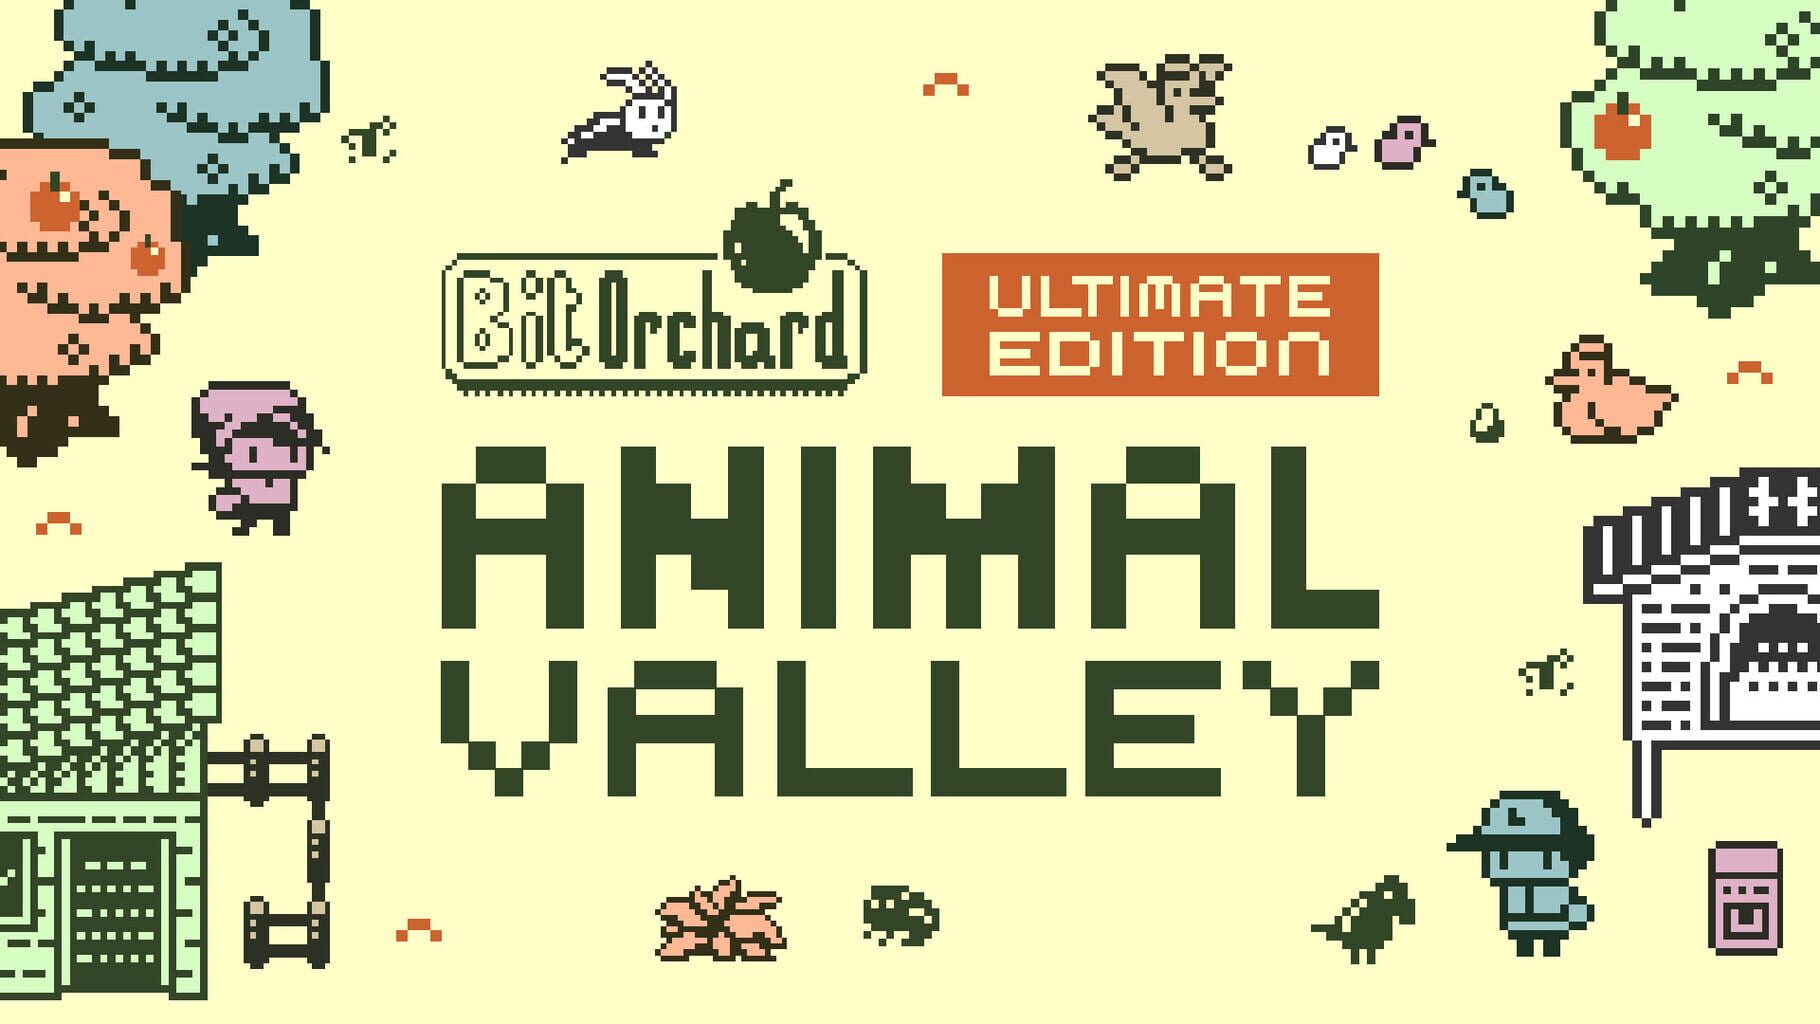 Bit Orchard: Animal Valley - Ultimate Edition artwork